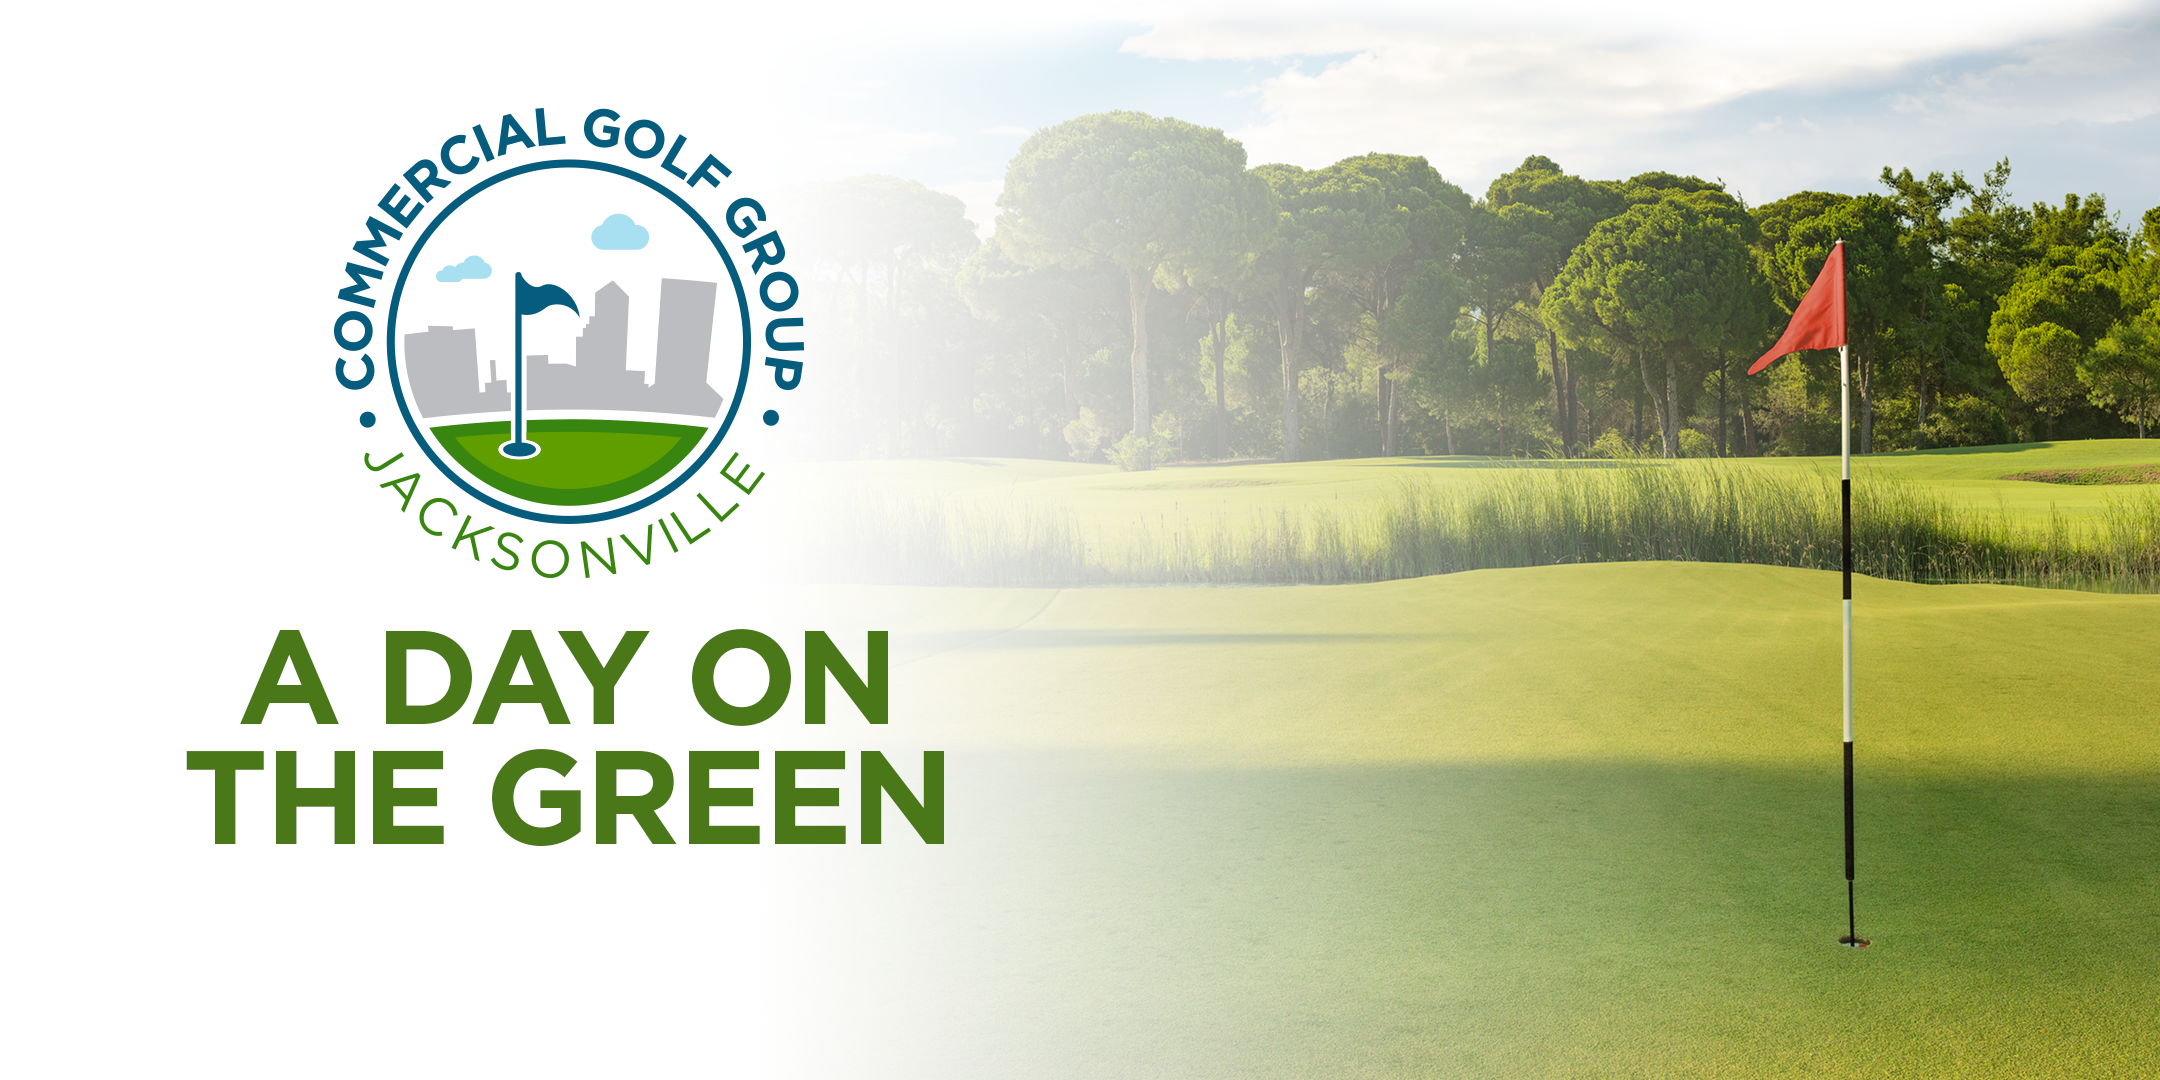 COMMERCIAL GOLF GROUP presents "A Day On The Green"